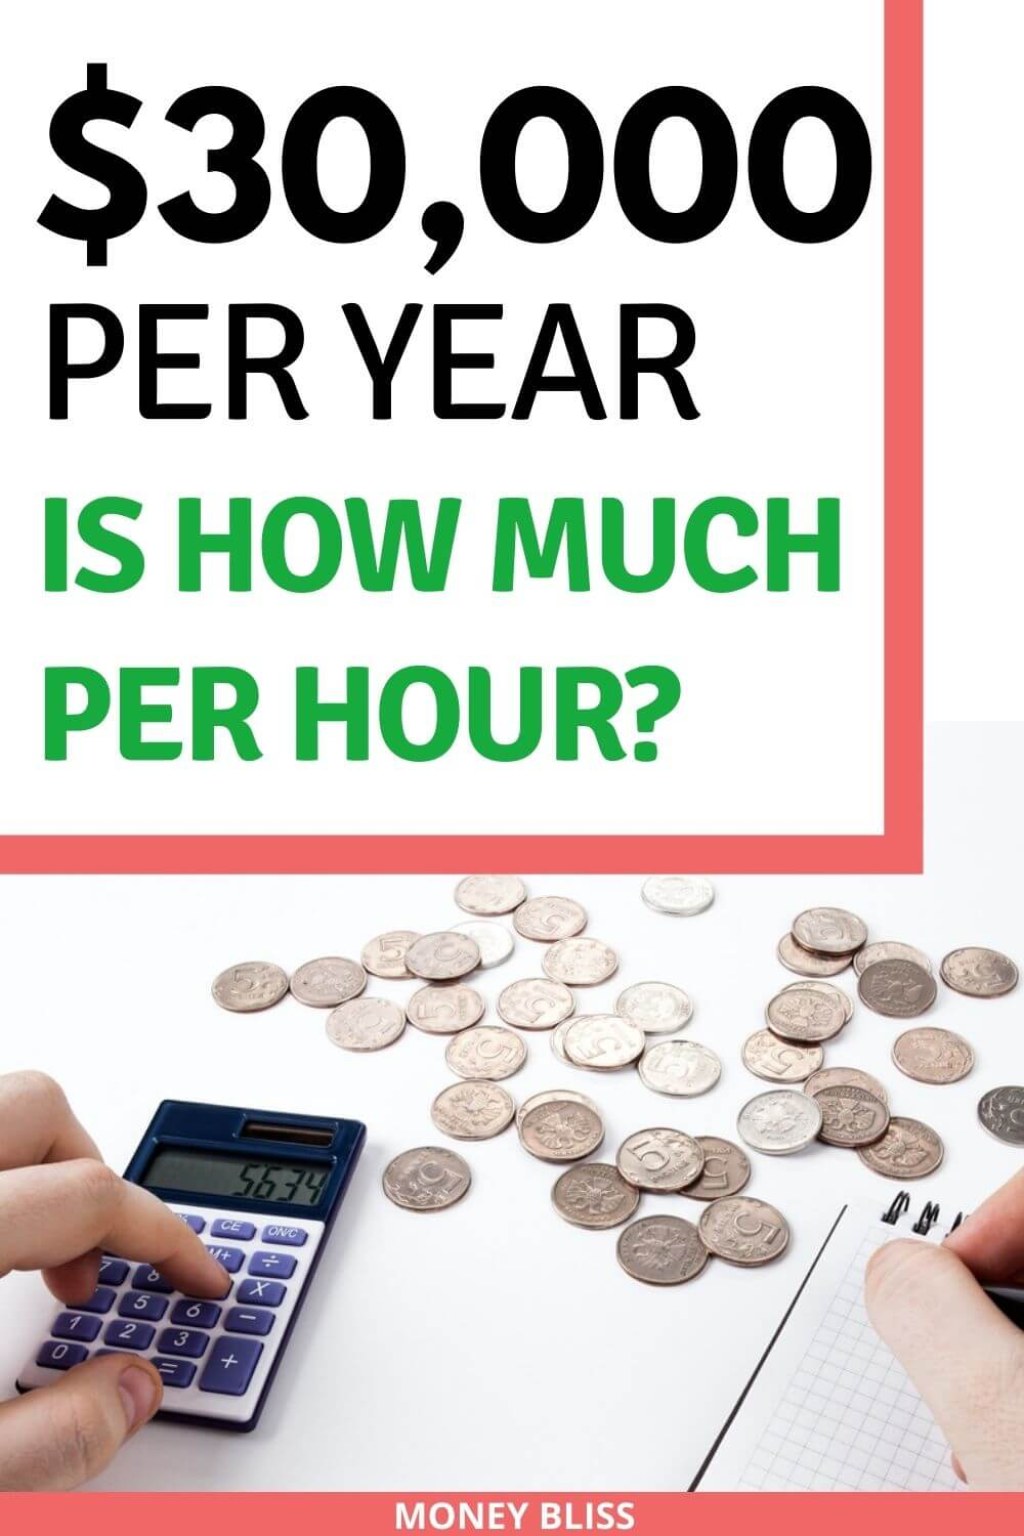 budgeting on 30 000 a year - $ a Year is How Much an Hour? Good Salary or No? - Money Bliss